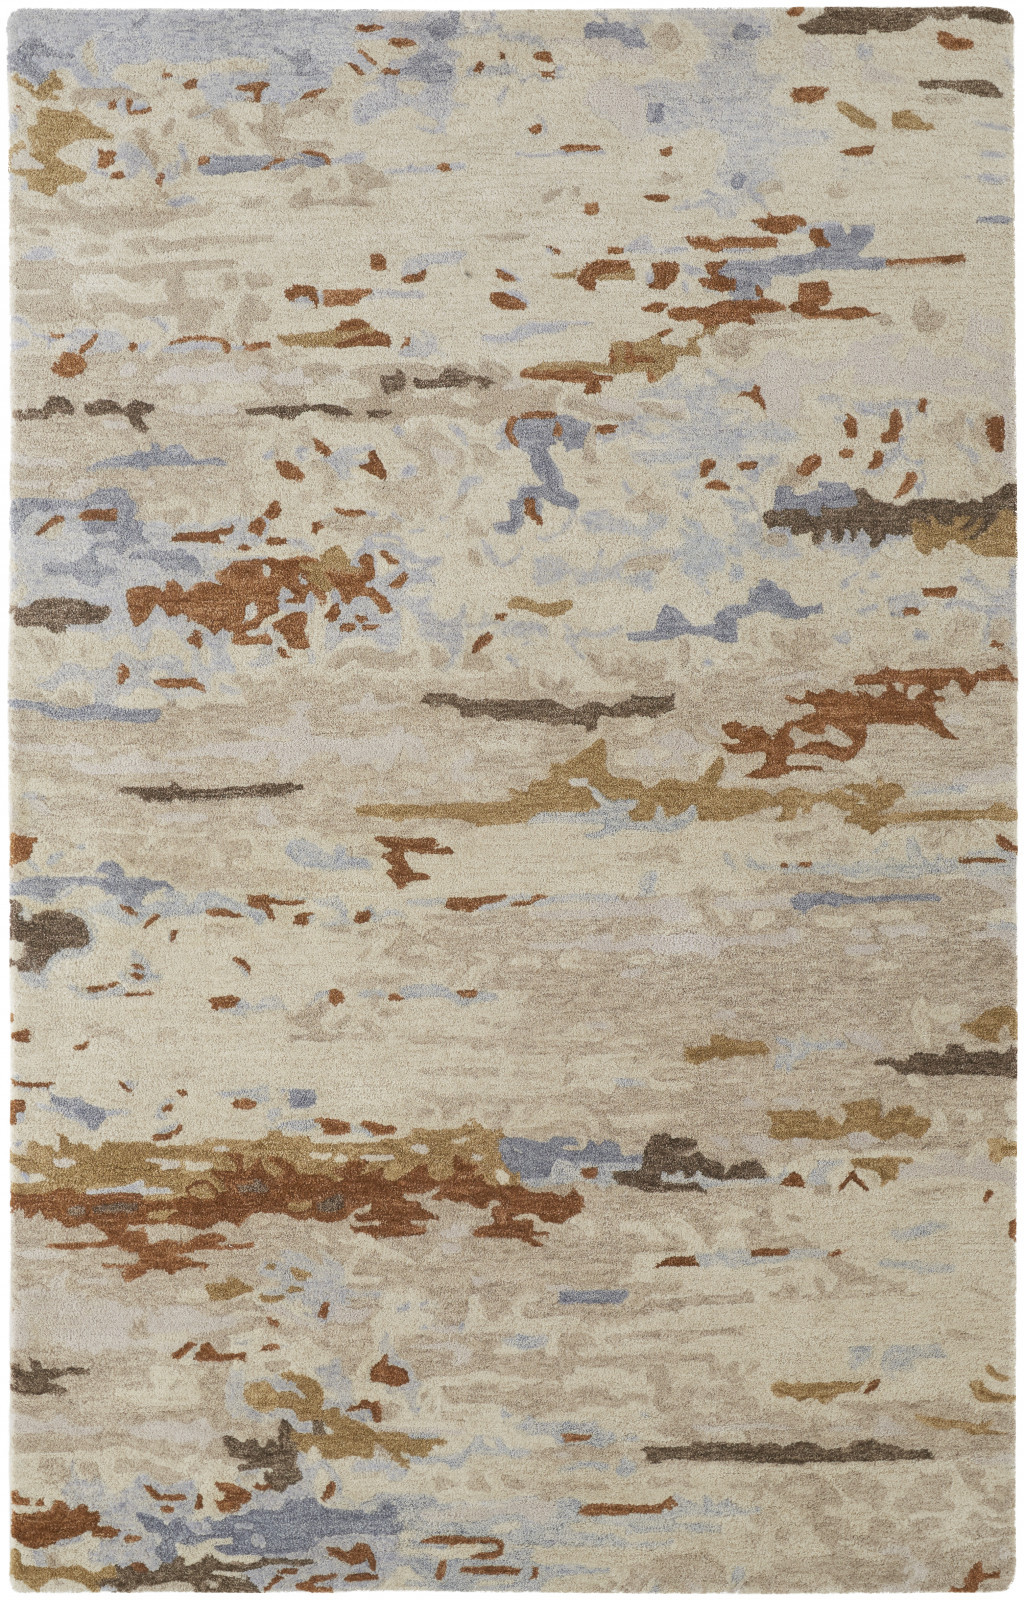 4' X 6' Ivory Blue And Brown Wool Abstract Tufted Handmade Stain Resistant Area Rug-513621-1